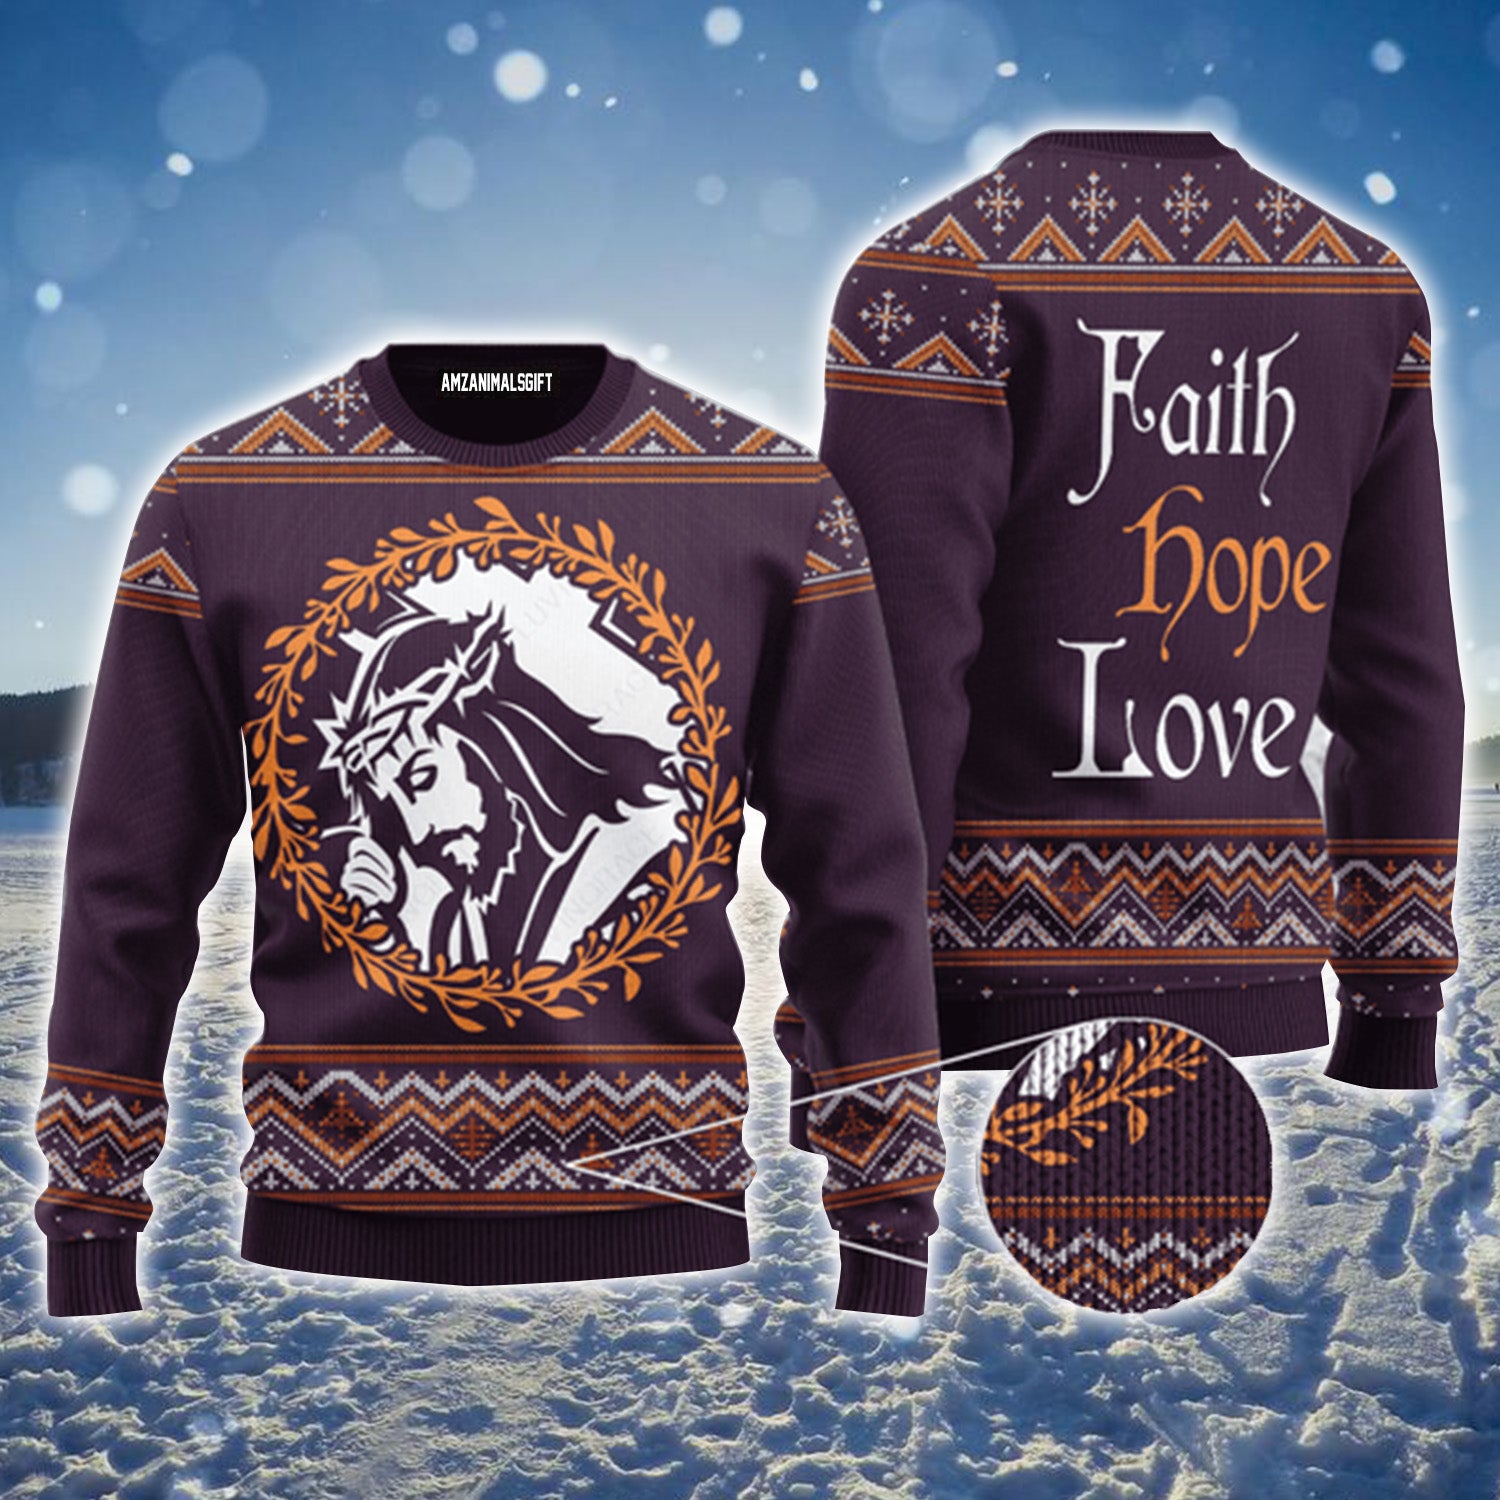 Christ God Jesus Face Faith Hope Love Urly Sweater, Christmas Sweater For Men & Women - Perfect Gift For Christmas, New Year, Winter